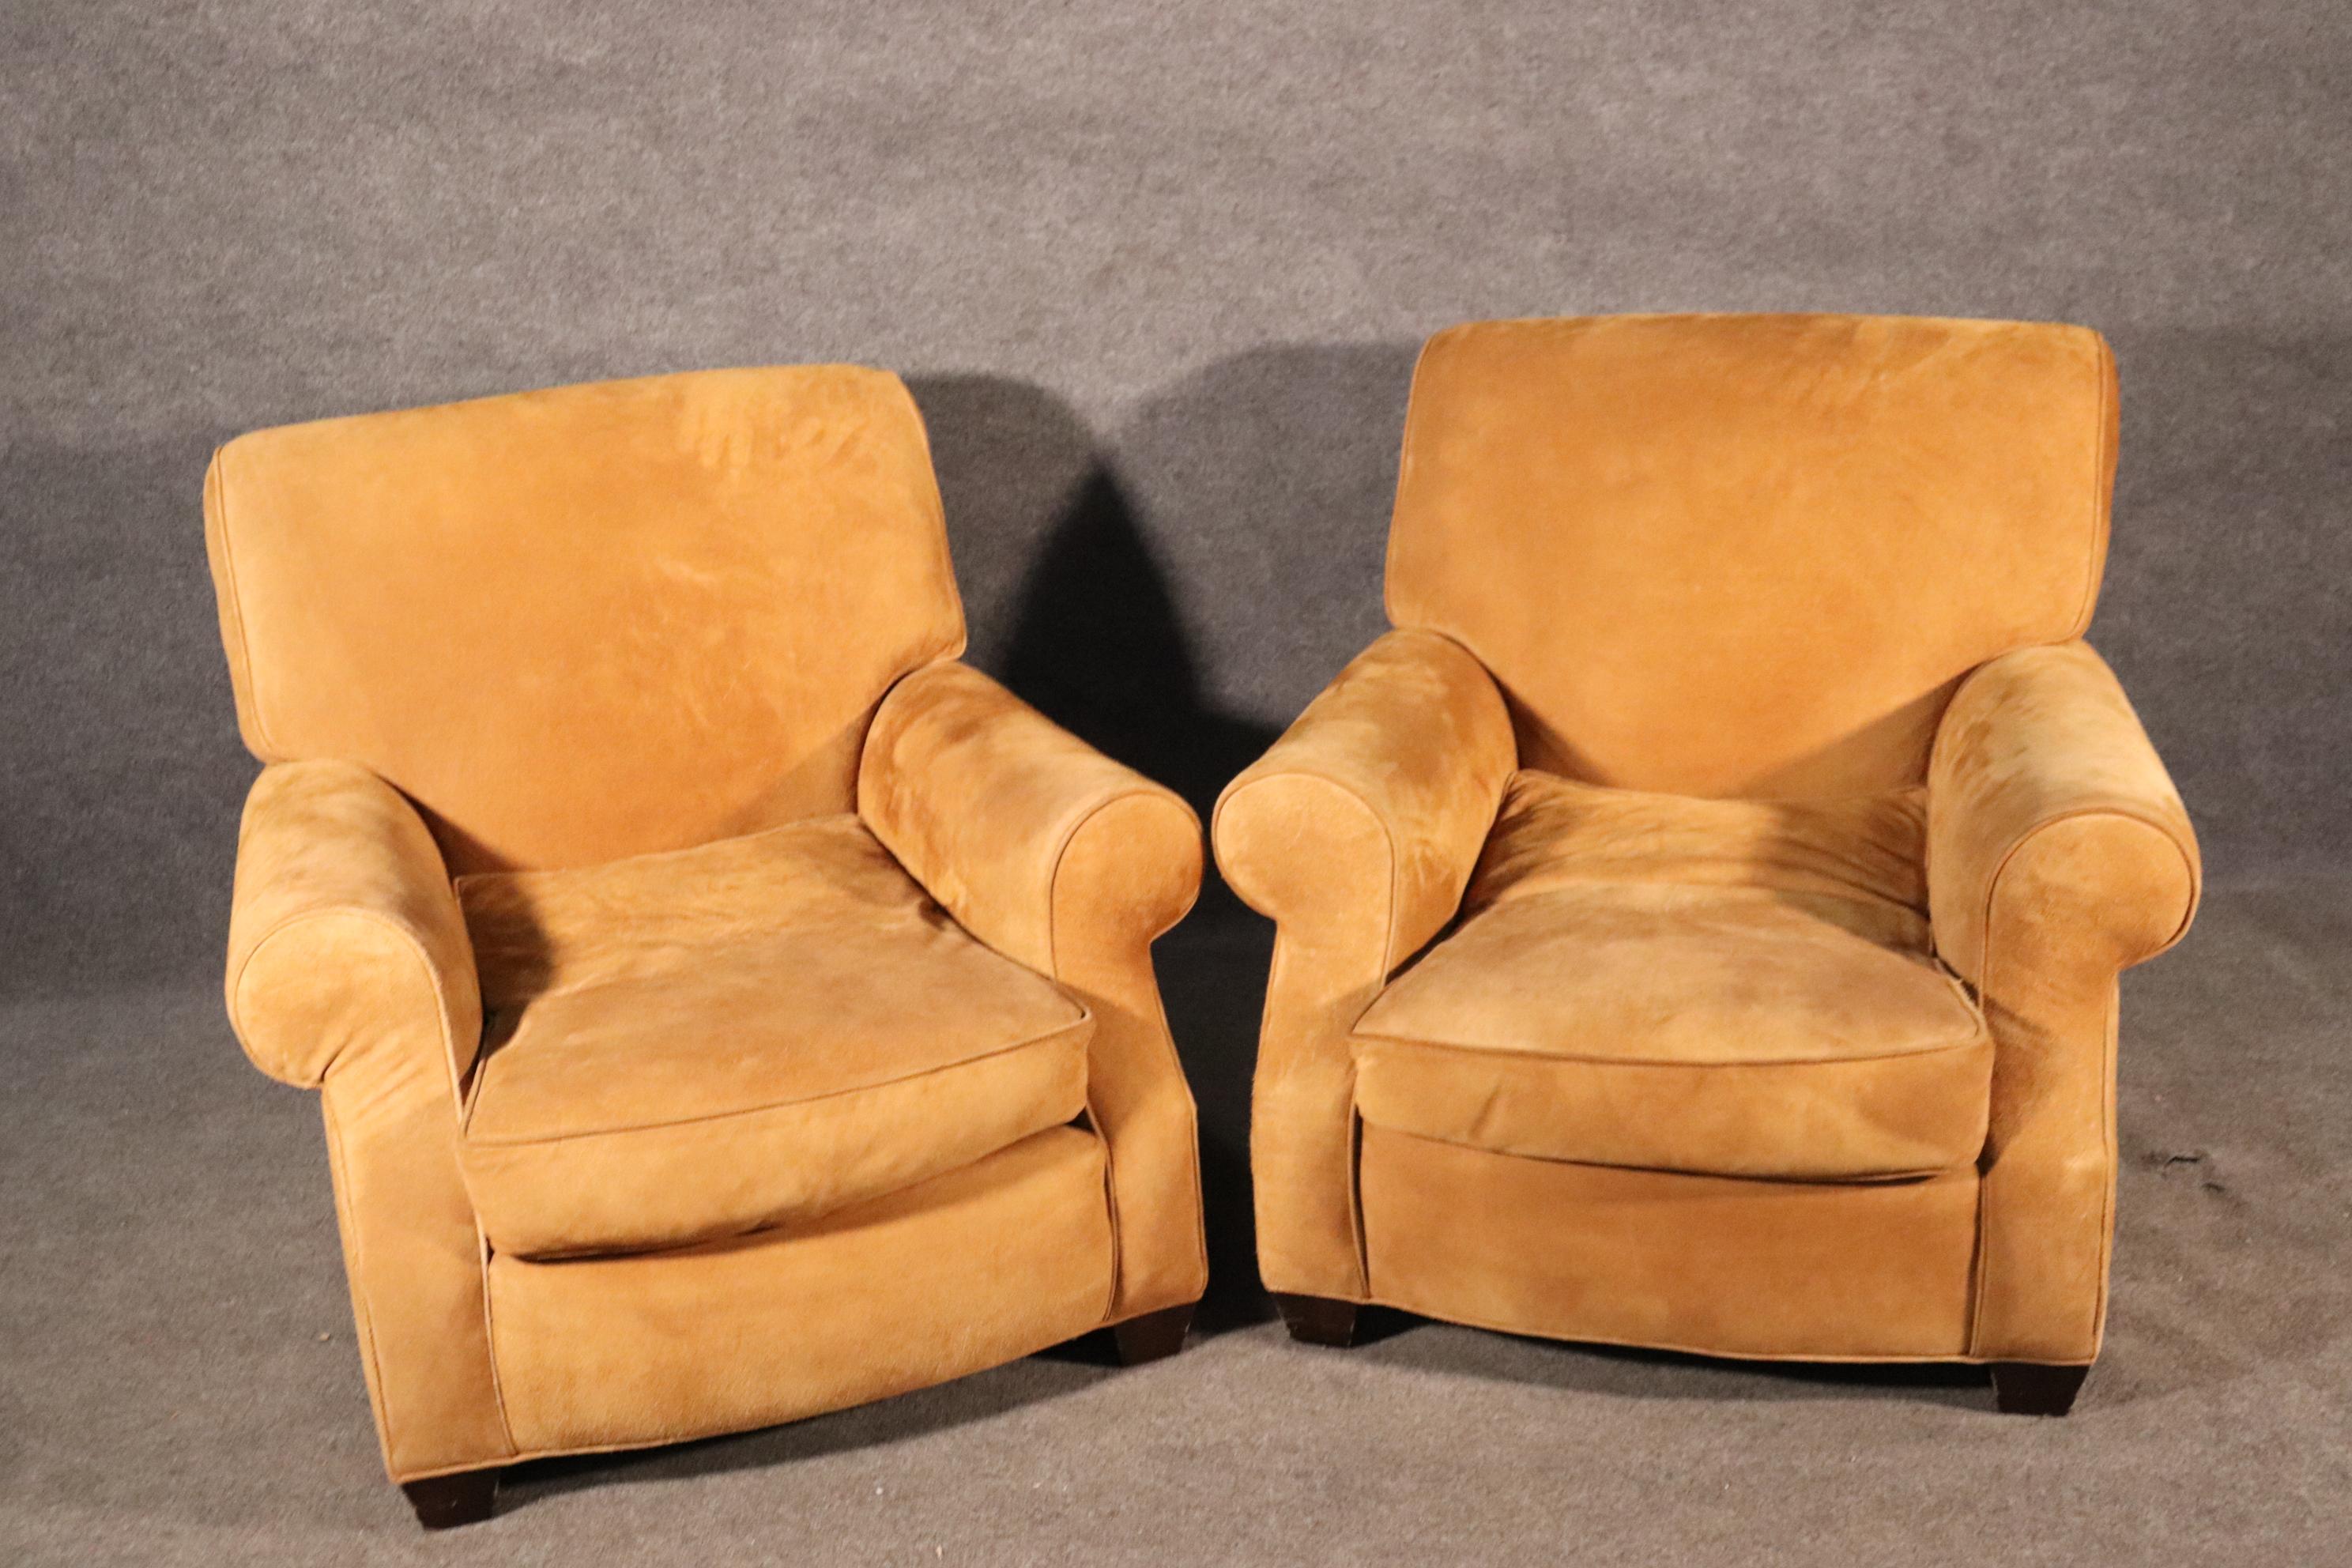 This is a beautiful pair of suede Williams Sonoma of club chairs. The chairs are in very good used condition and are extremely comfortable in my opinion. The chairs measure 36 wide x 35 tall x 43 deep and the seat height is 18 inches. They date to